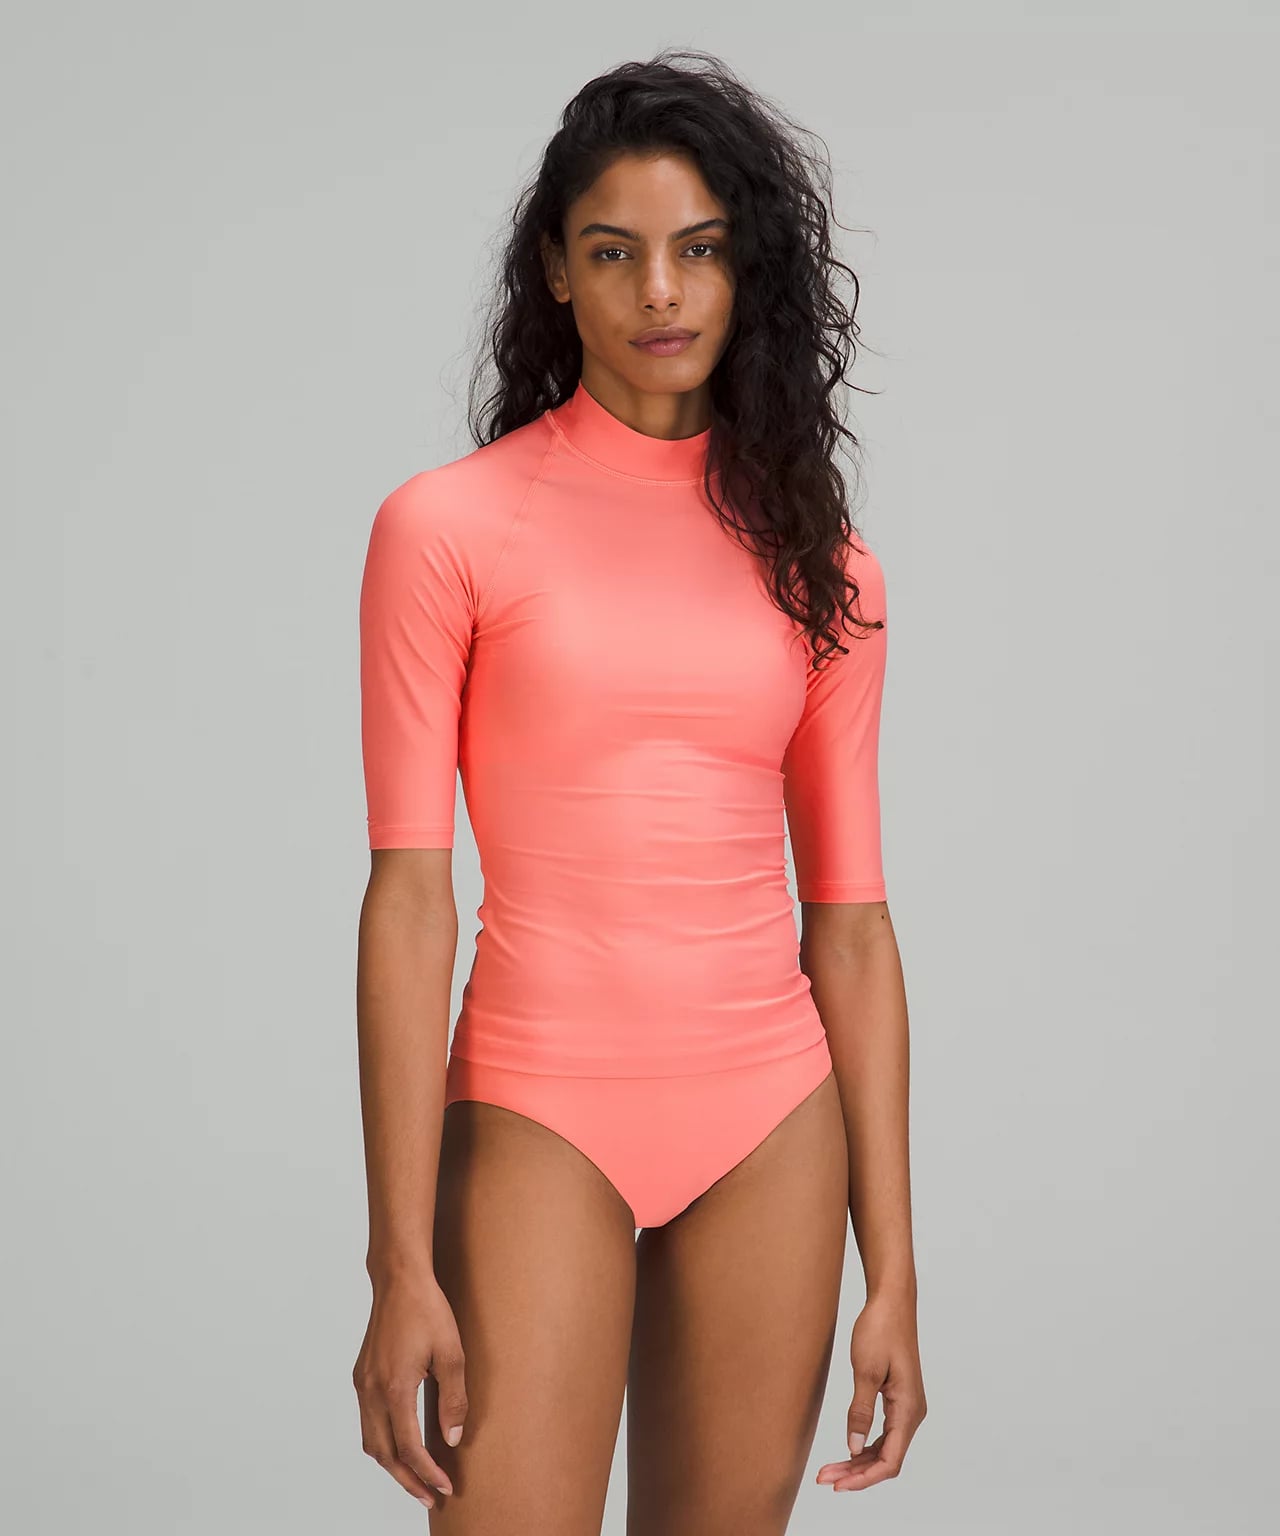 A Short Rash Guard: Lululemon Waterside UV Protection Short-Sleeve Rash  Guard, 11 Lululemon Swimsuits You Can Be Active In